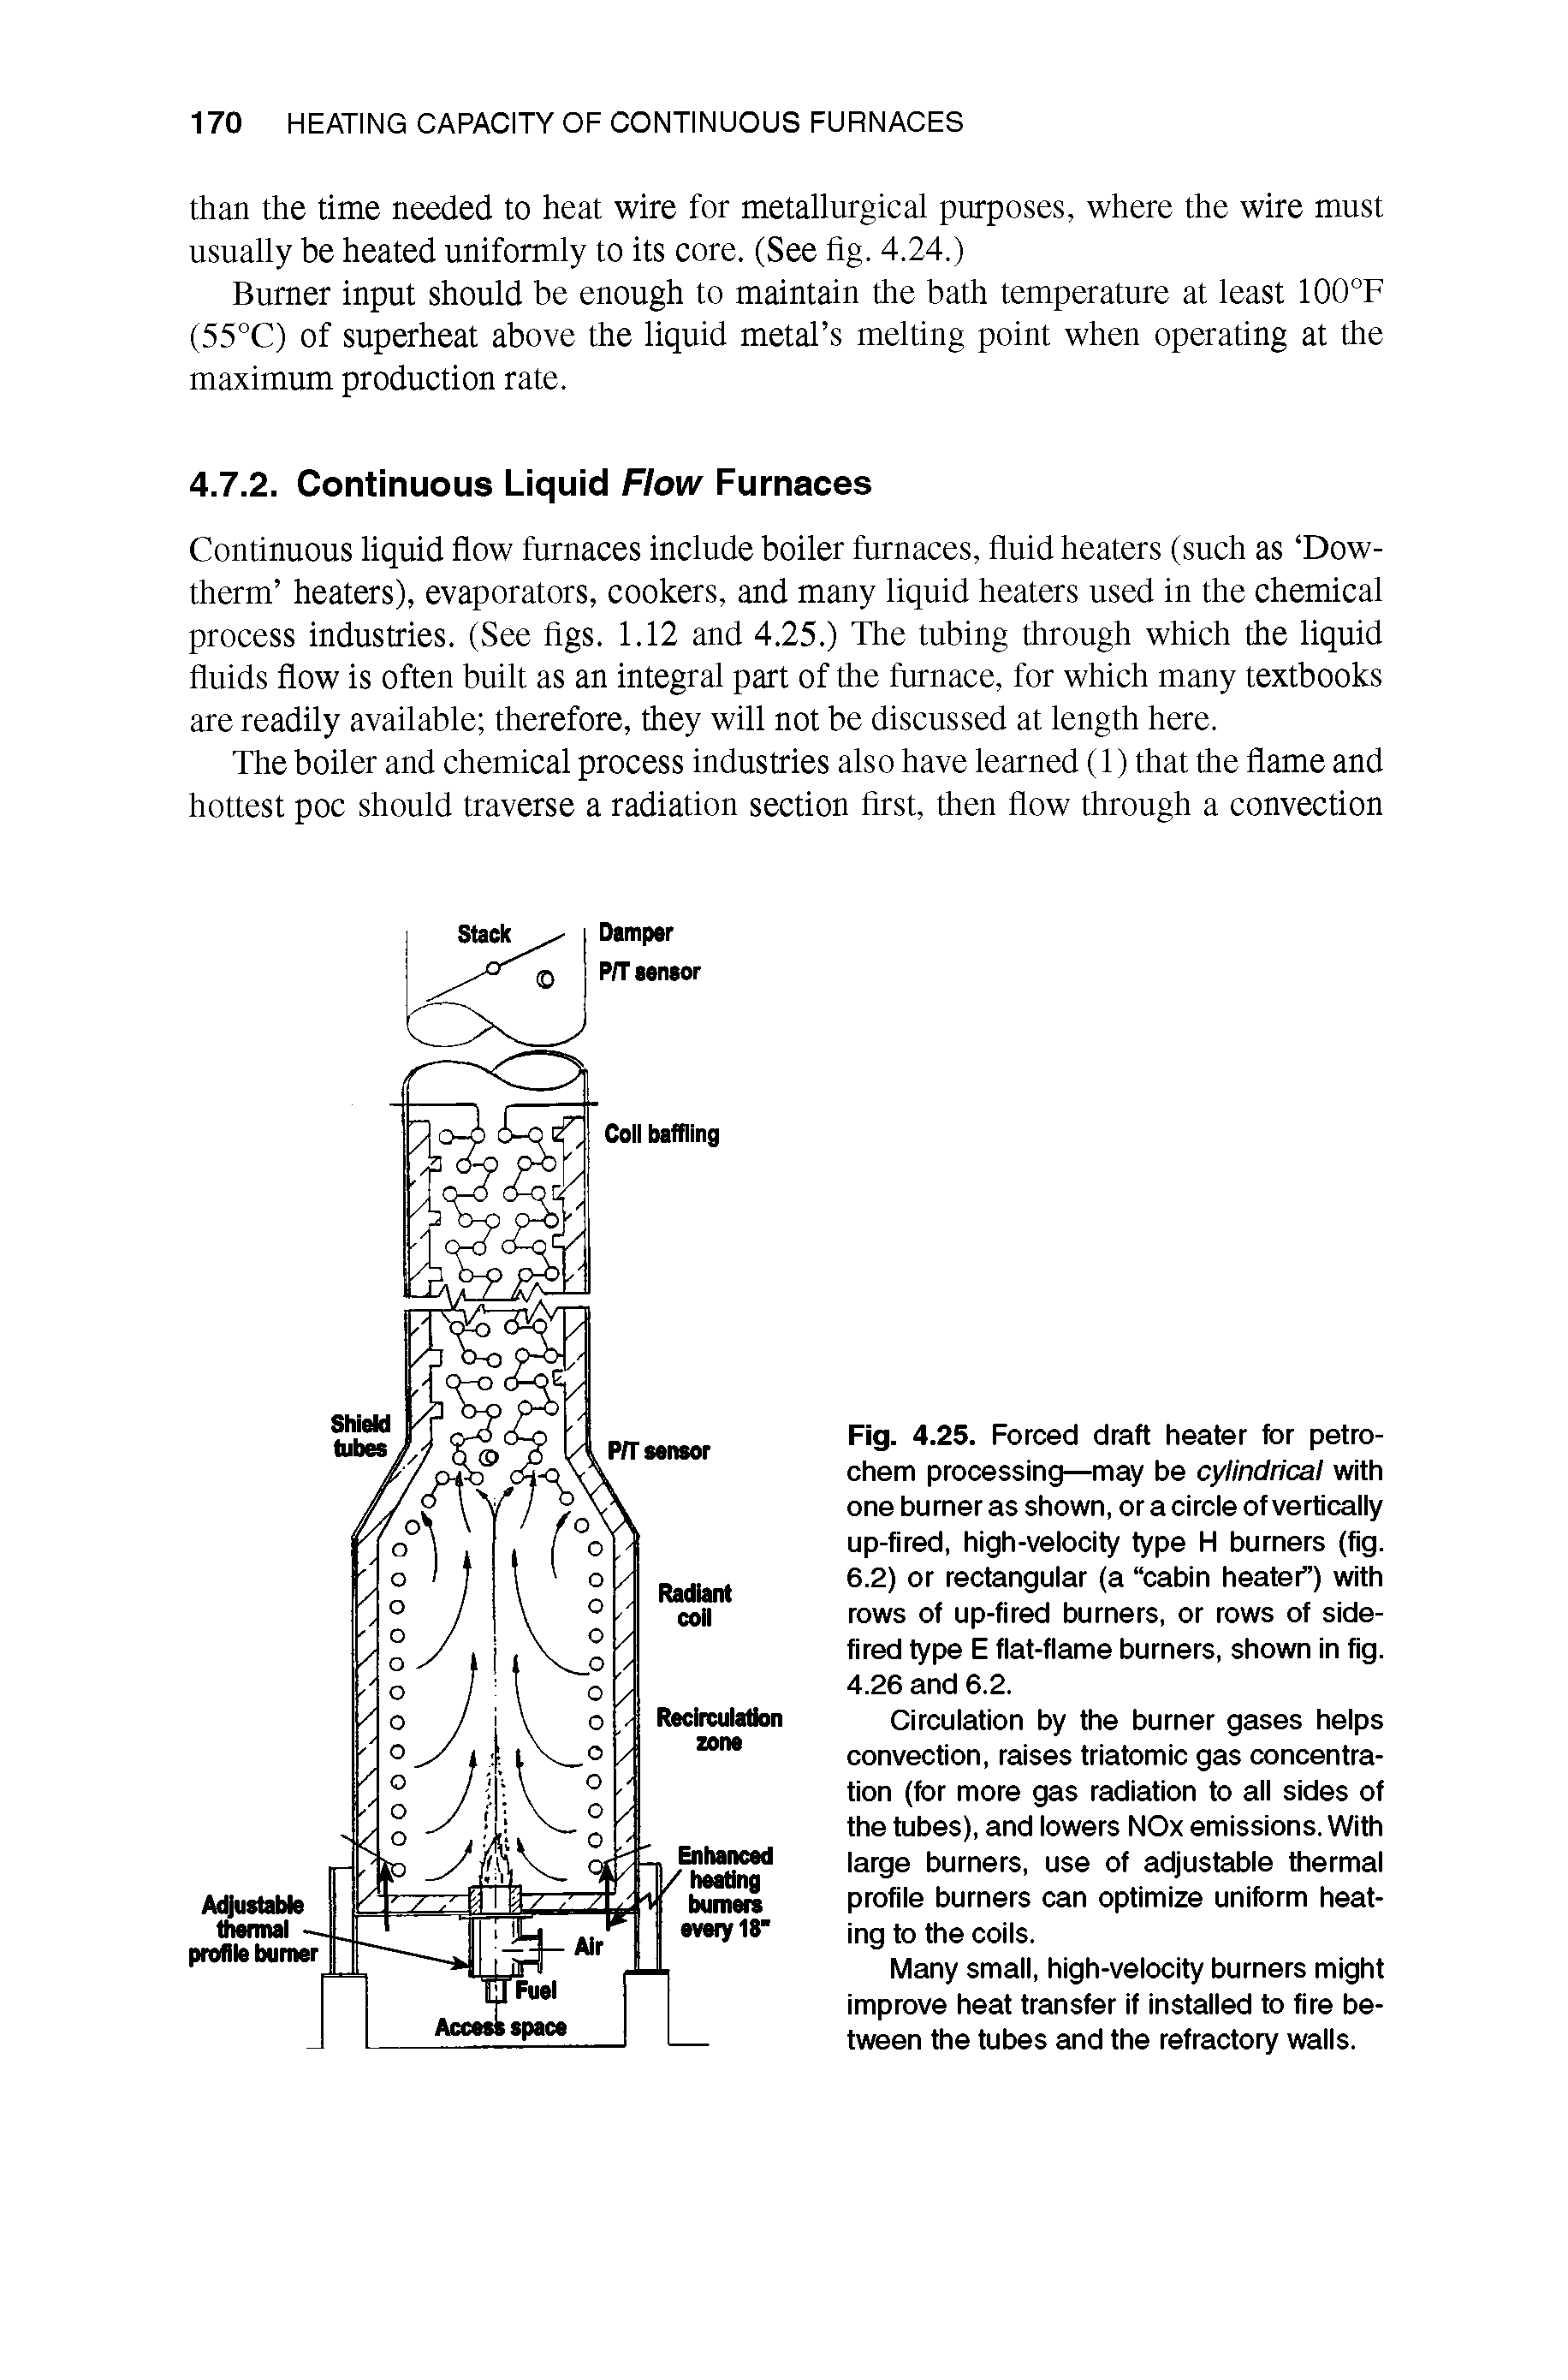 Fig. 4.25. Forced draft heater for petro-chem processing—may be cylindrical with one burner as shown, or a circie of vertically up-fired, high-velocity type H burners (fig. 6.2) or rectangular (a cabin heater) with rows of up-fired burners, or rows of side-fired type E flat-flame burners, shown in fig. 4.26 and 6.2.